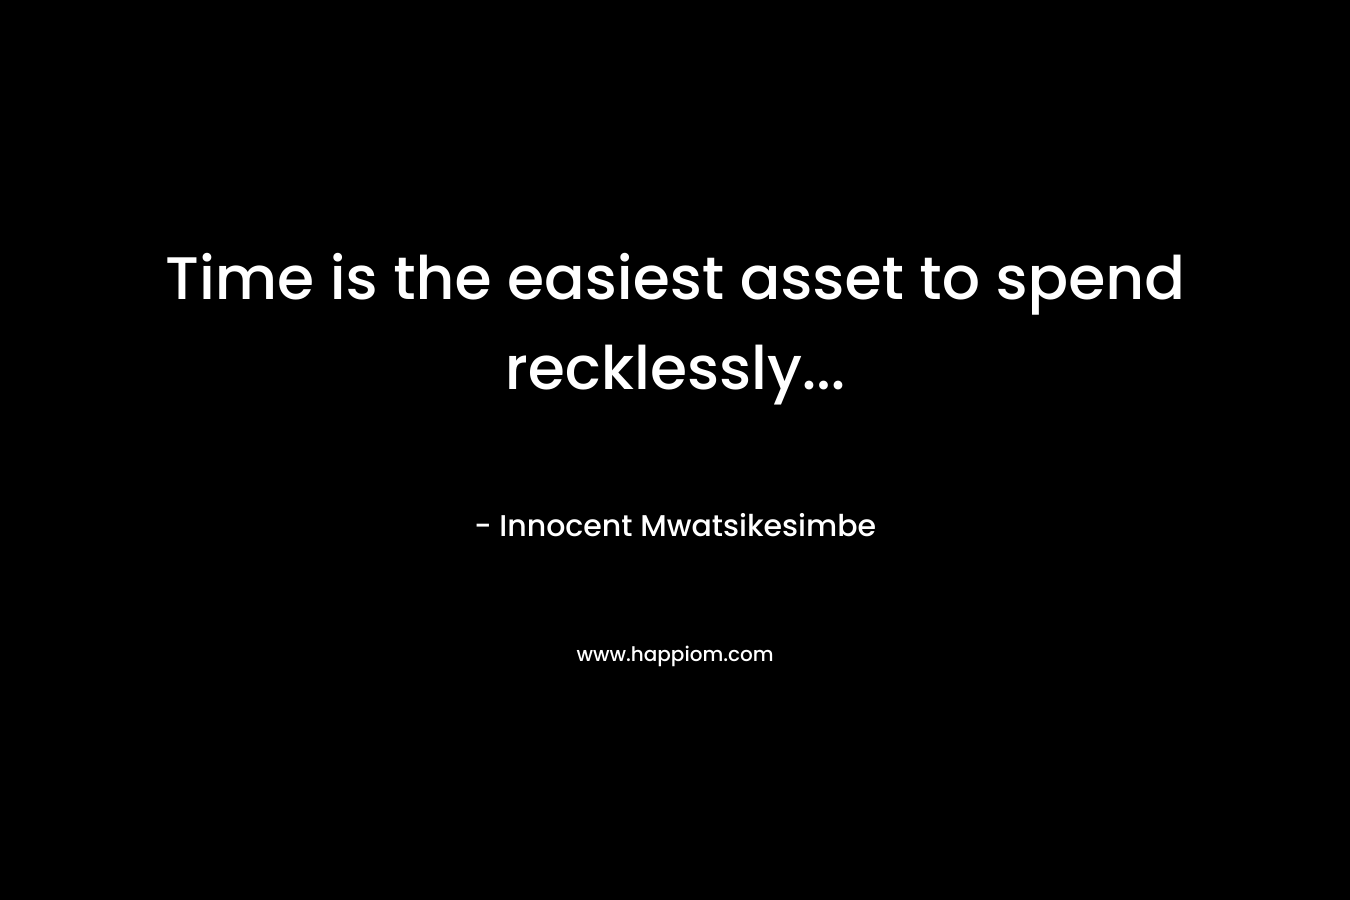 Time is the easiest asset to spend recklessly… – Innocent Mwatsikesimbe